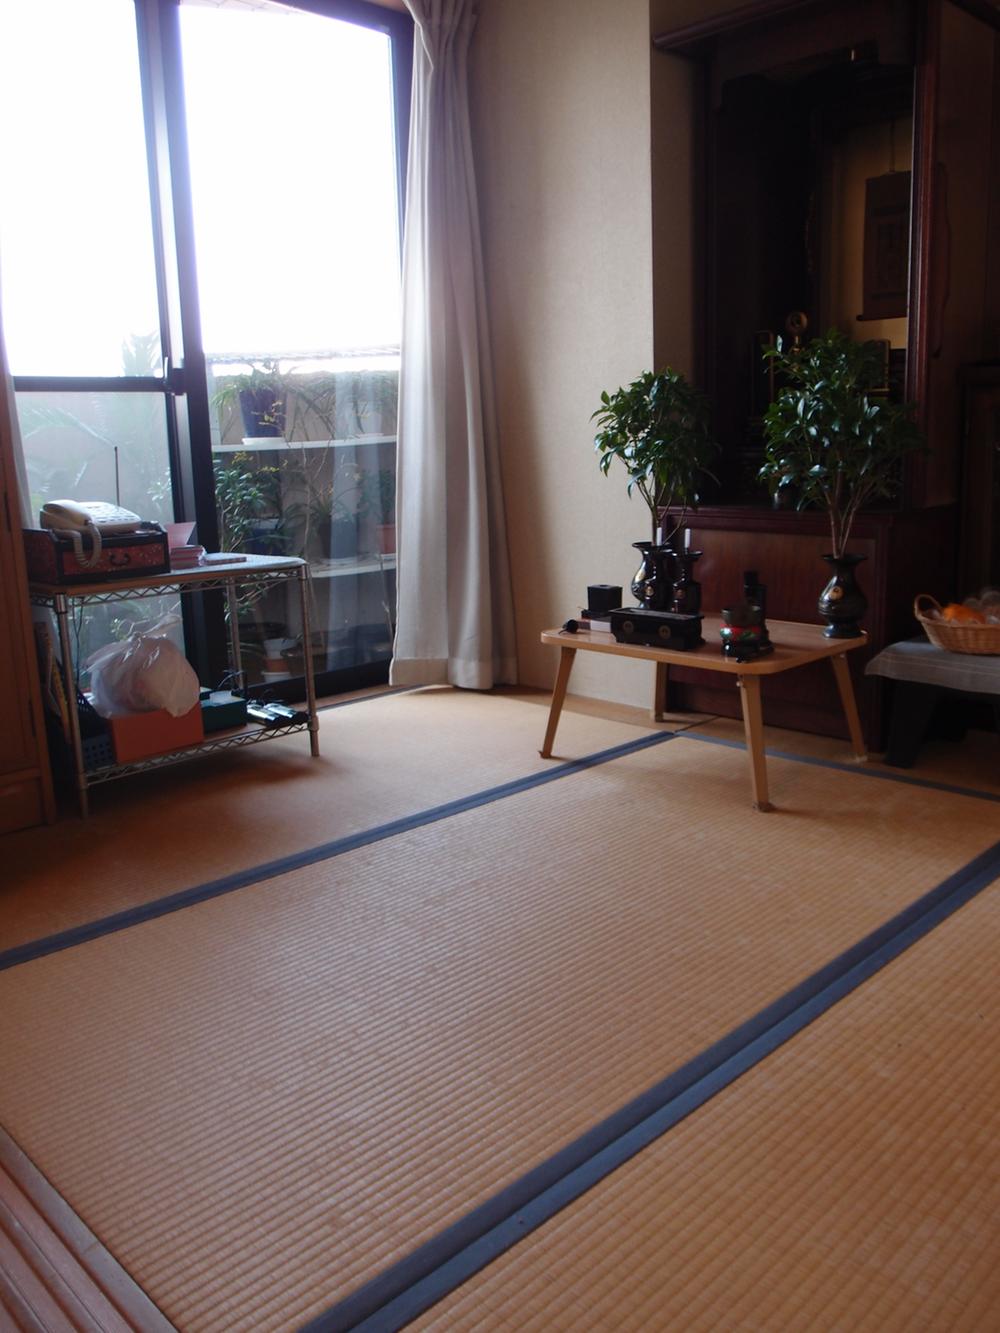 Non-living room. Japanese-style room (furniture, etc. are not included in the sale)